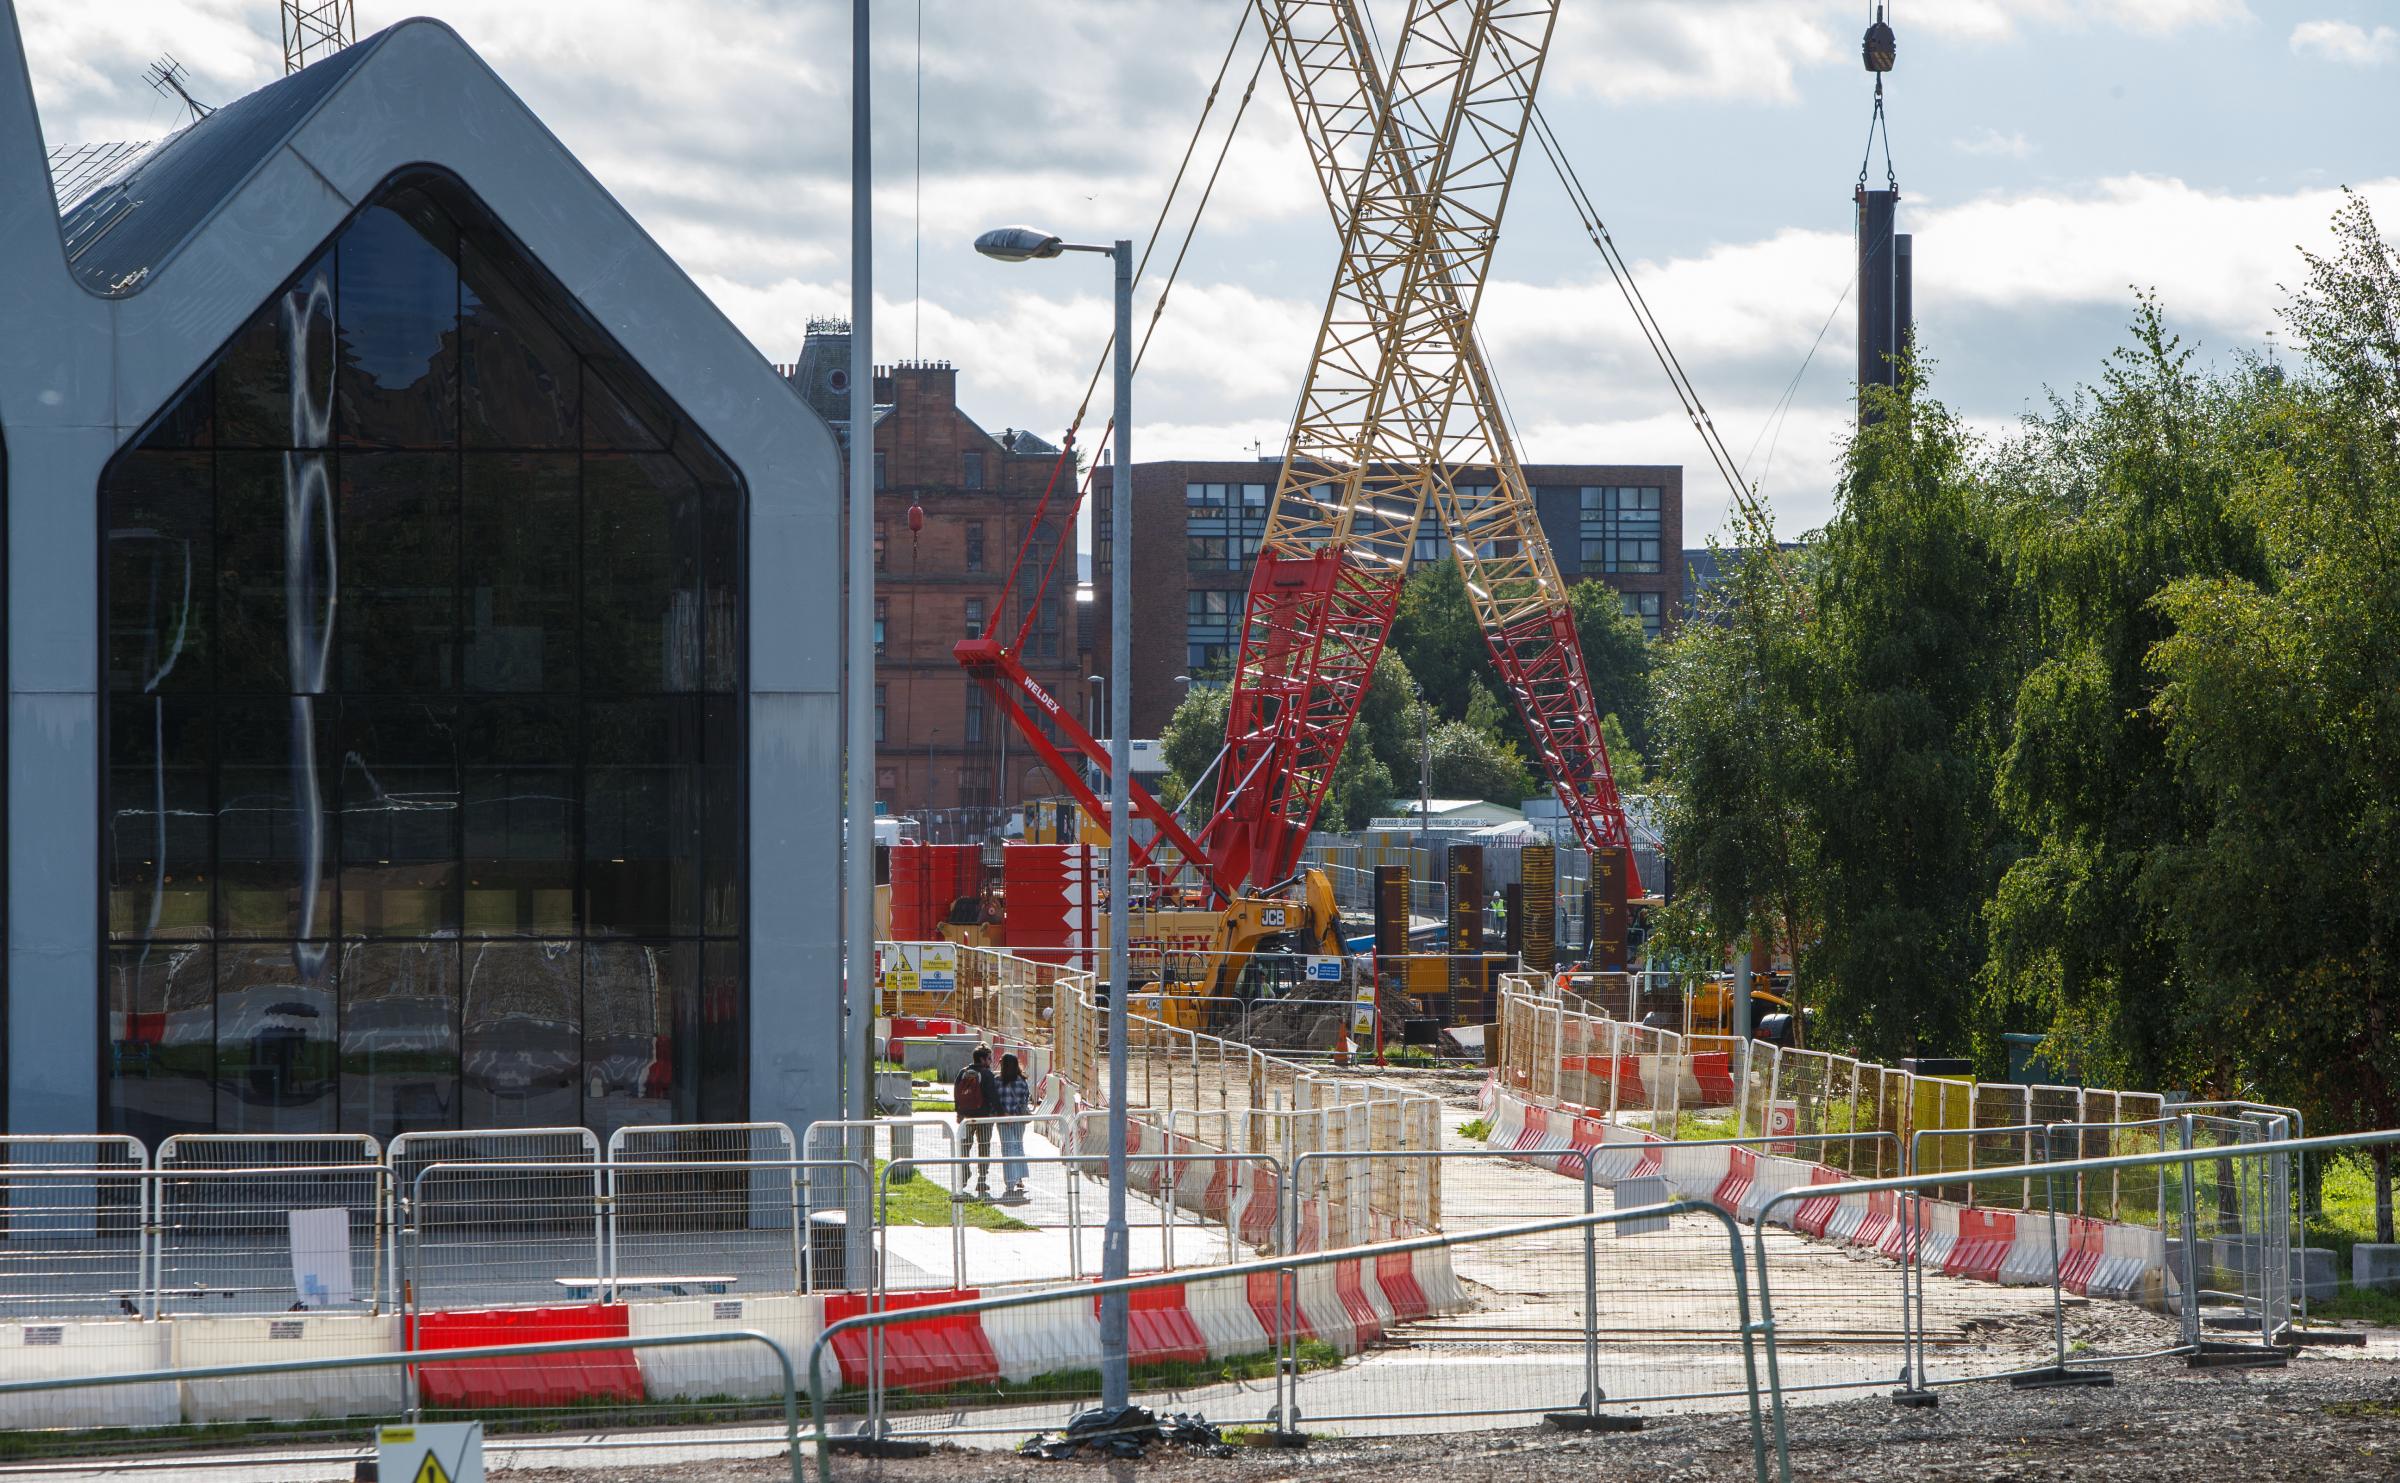 Construction of the Govan-Partick pedestrian bridge in Glasgow. The single-span swing bridge will connect Water Row in Govan and Pointhouse Quay (pictured) at the Riverside museum. Photograph by Colin Mearns.